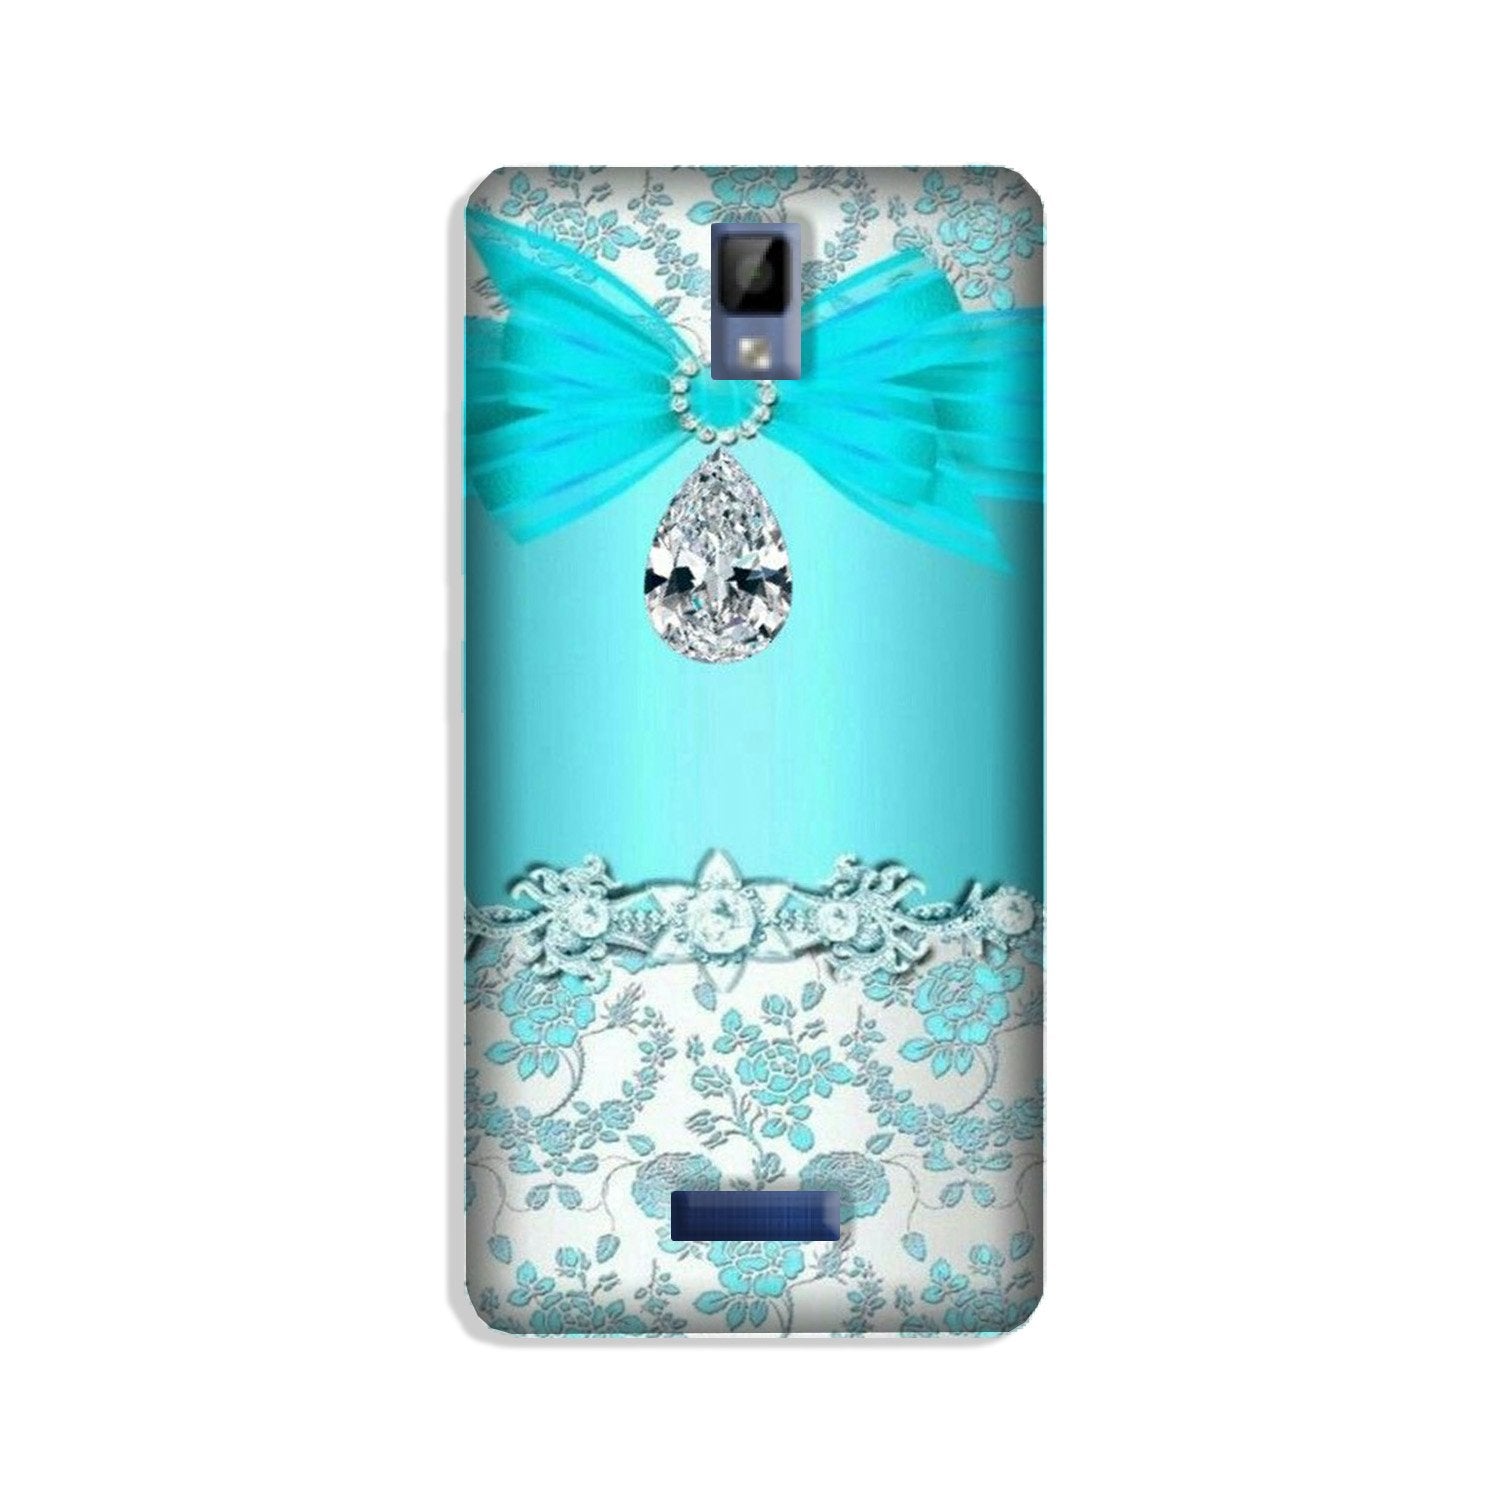 Shinny Blue Background Case for Gionee P7